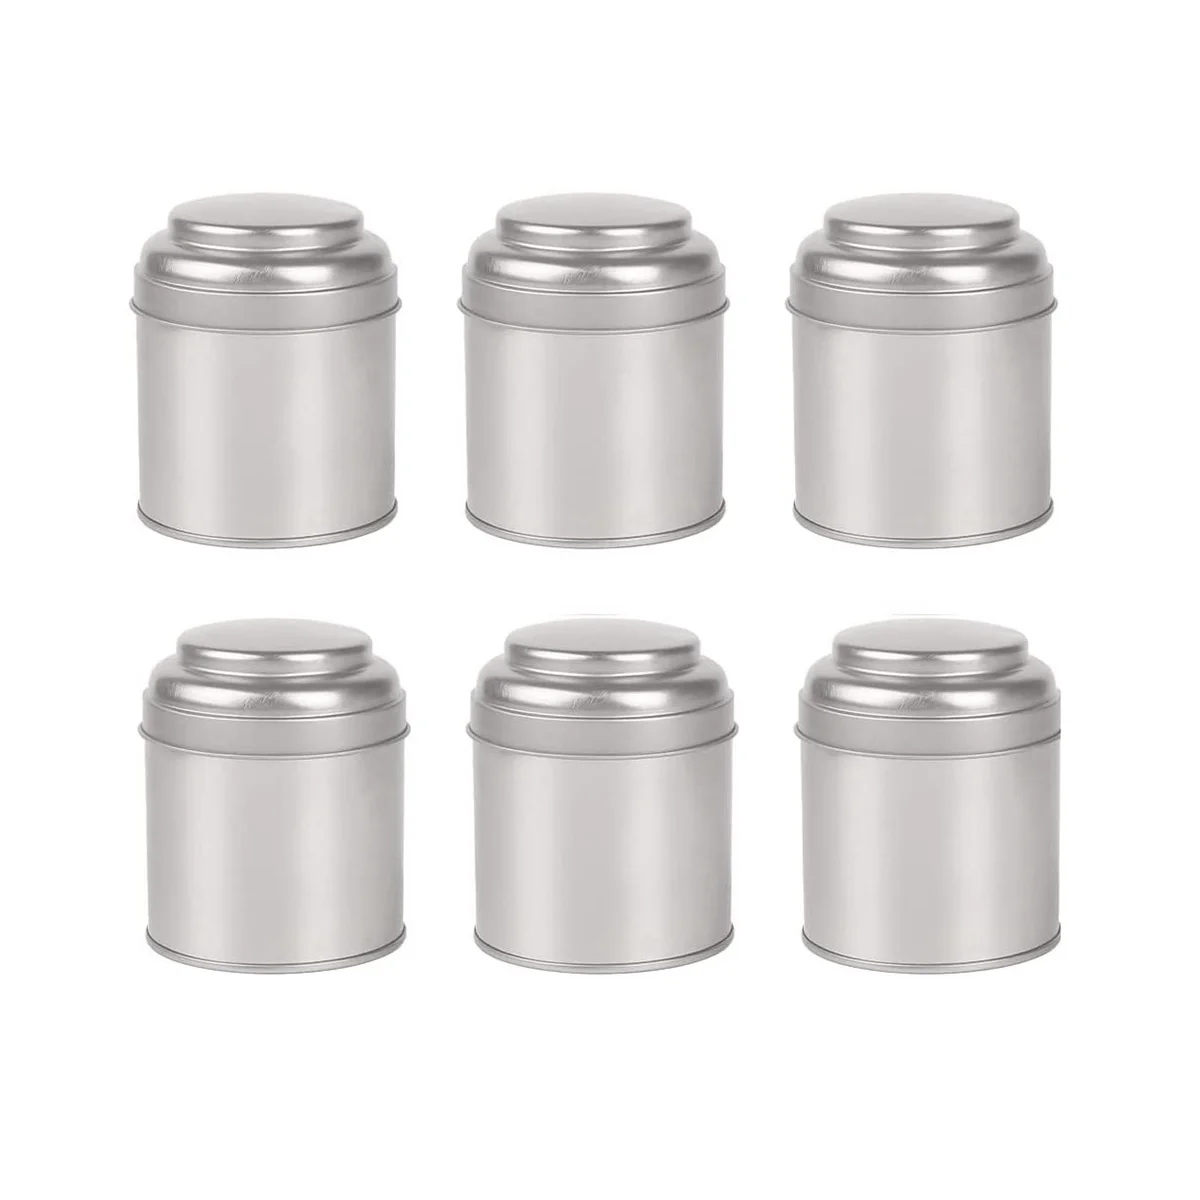 

6Pcs Tea Tins Canister with Airtight Double Lids,Mini Tin Can Box and Small Round Kitchen Canisters for Tea (Silver)